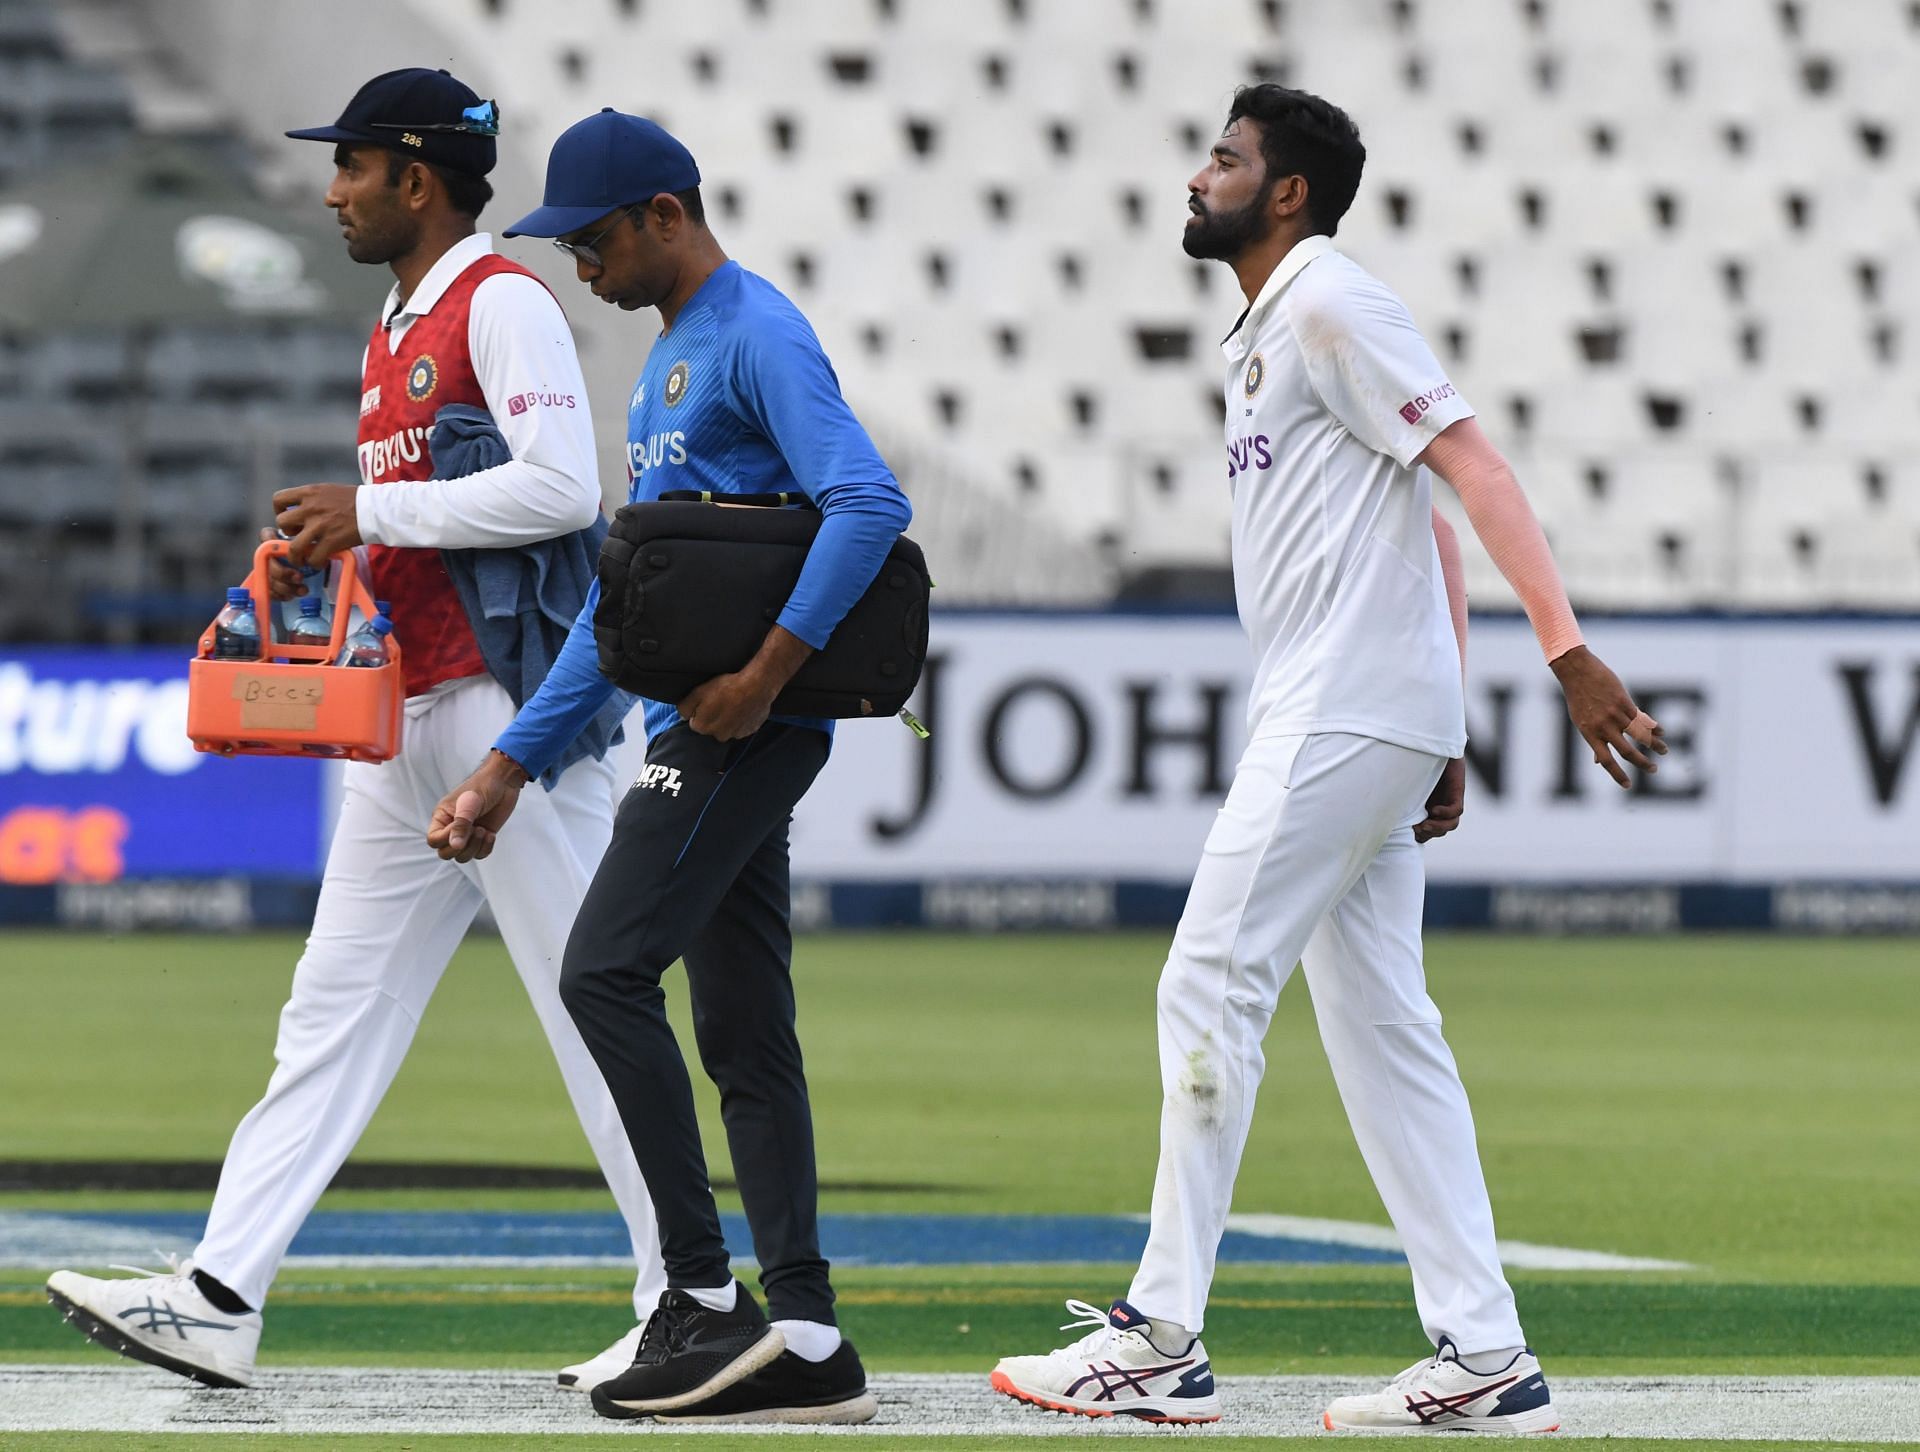 Siraj limped off at the end of the day during India vs South Africa Test